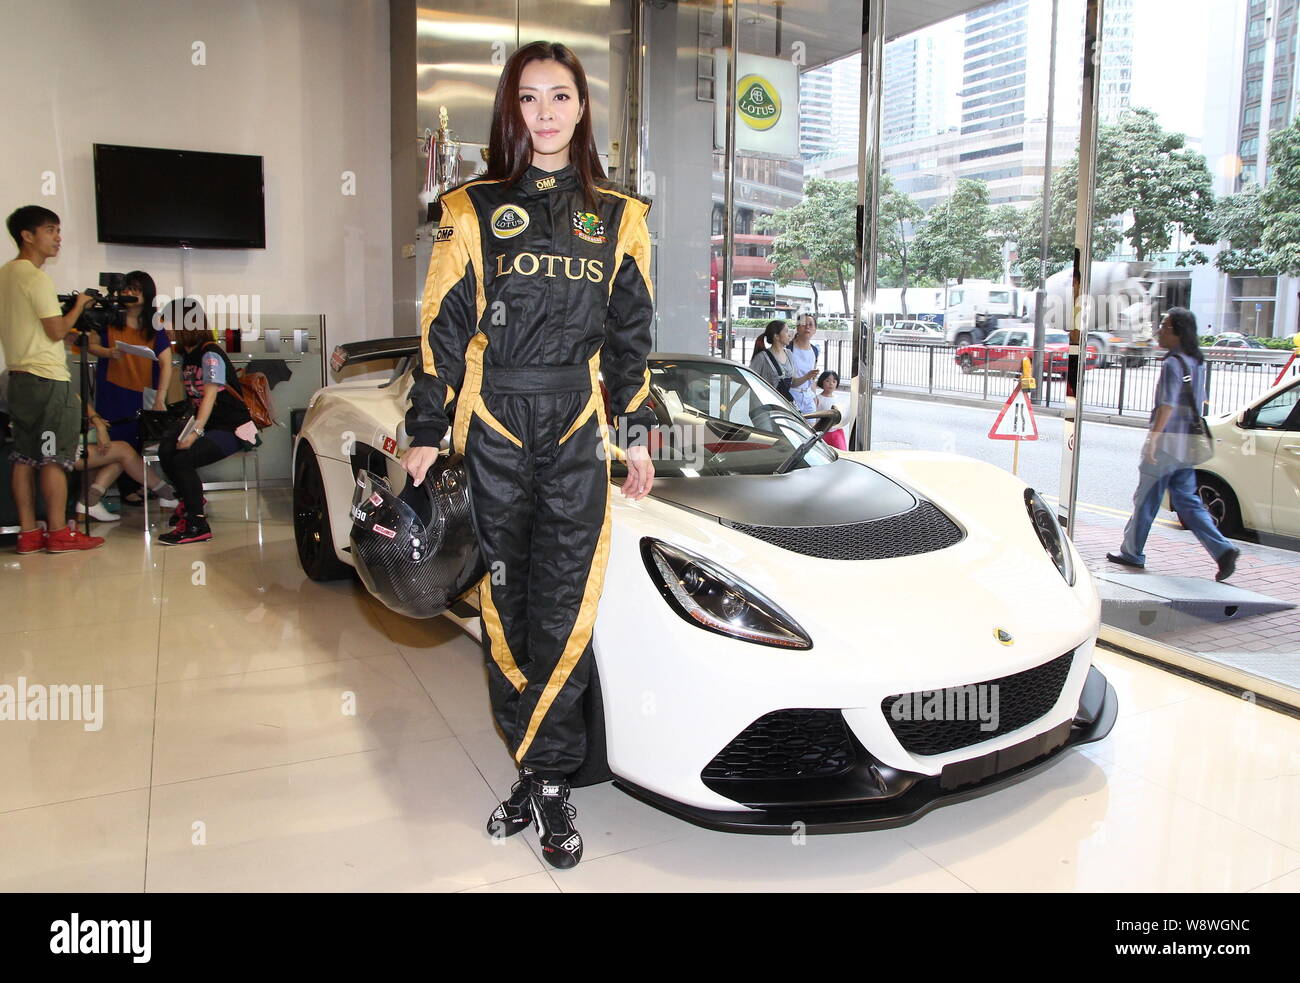 Hong Kong Model And Actress Lynn Hung Poses With A Racing Car During A Signing Ceremony For Her Competition In Lotus Greater China Races In Hong Kong Stock Photo Alamy